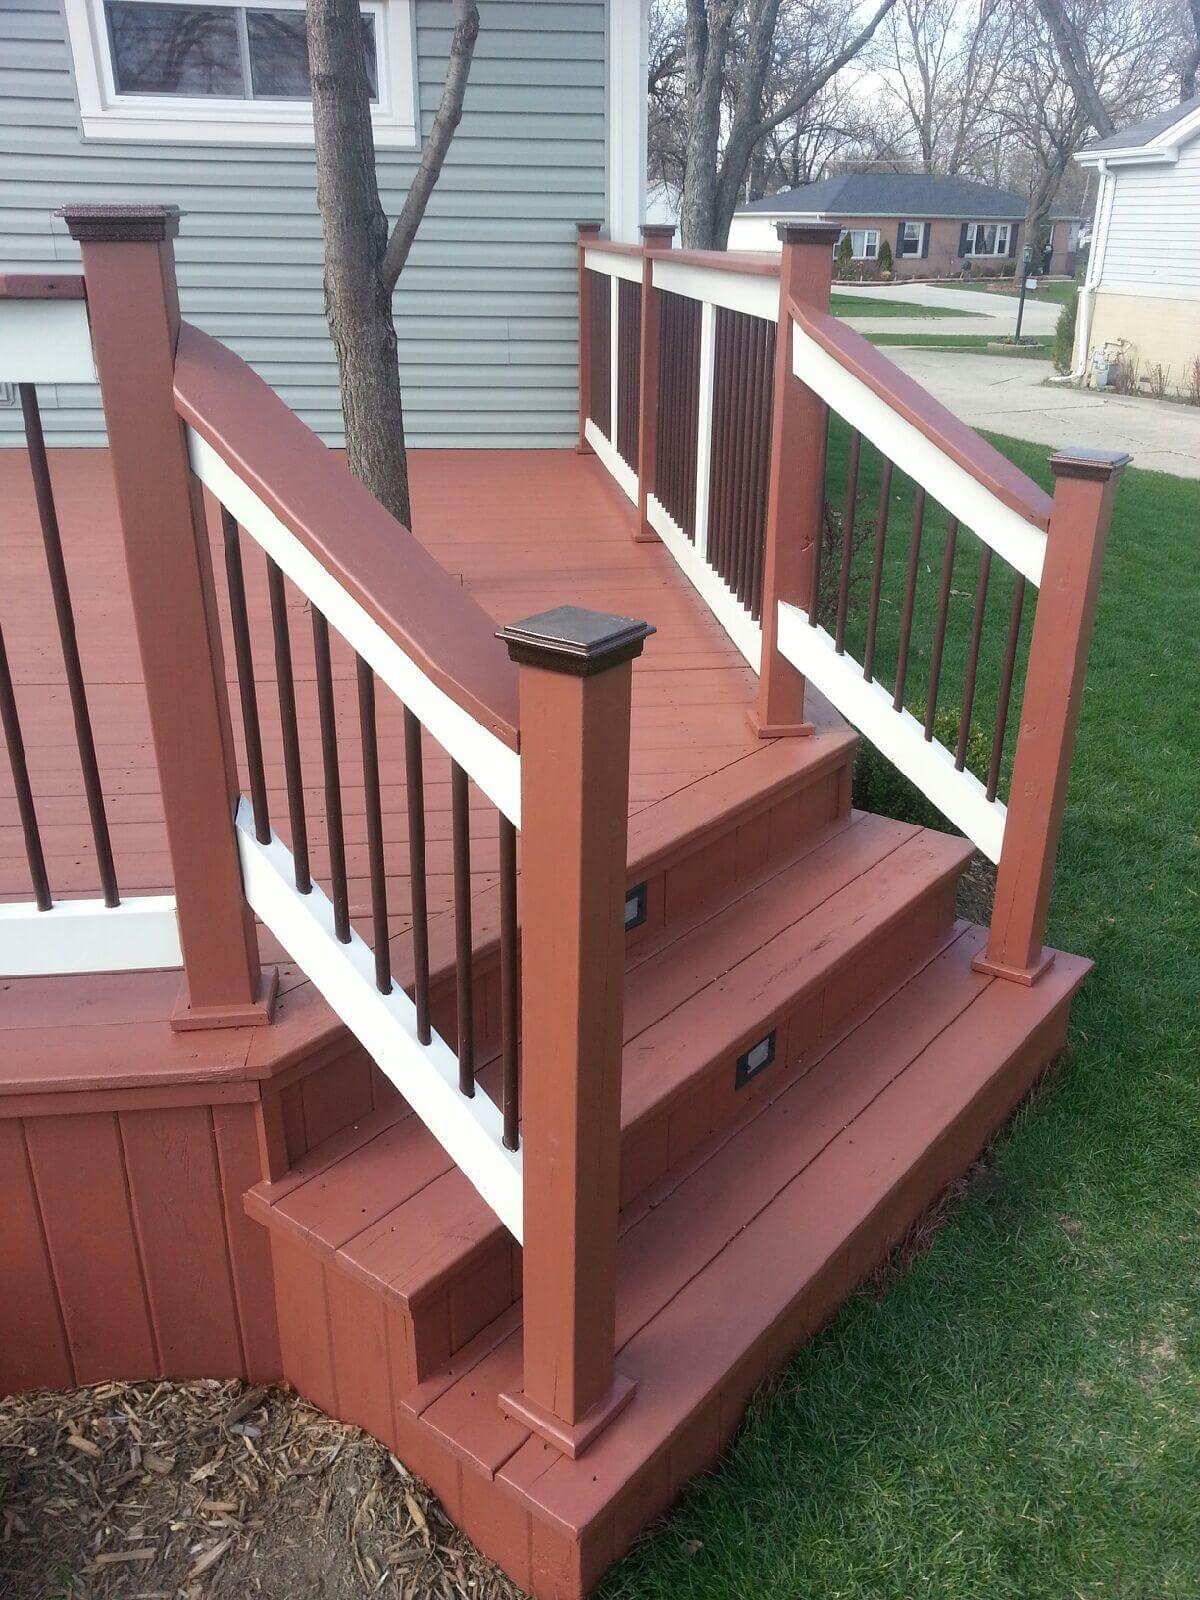 Repairs and maintenance for your deck, fence, and exterior wood staining. - Deck Staining Aurora - Deck Cleaning Services